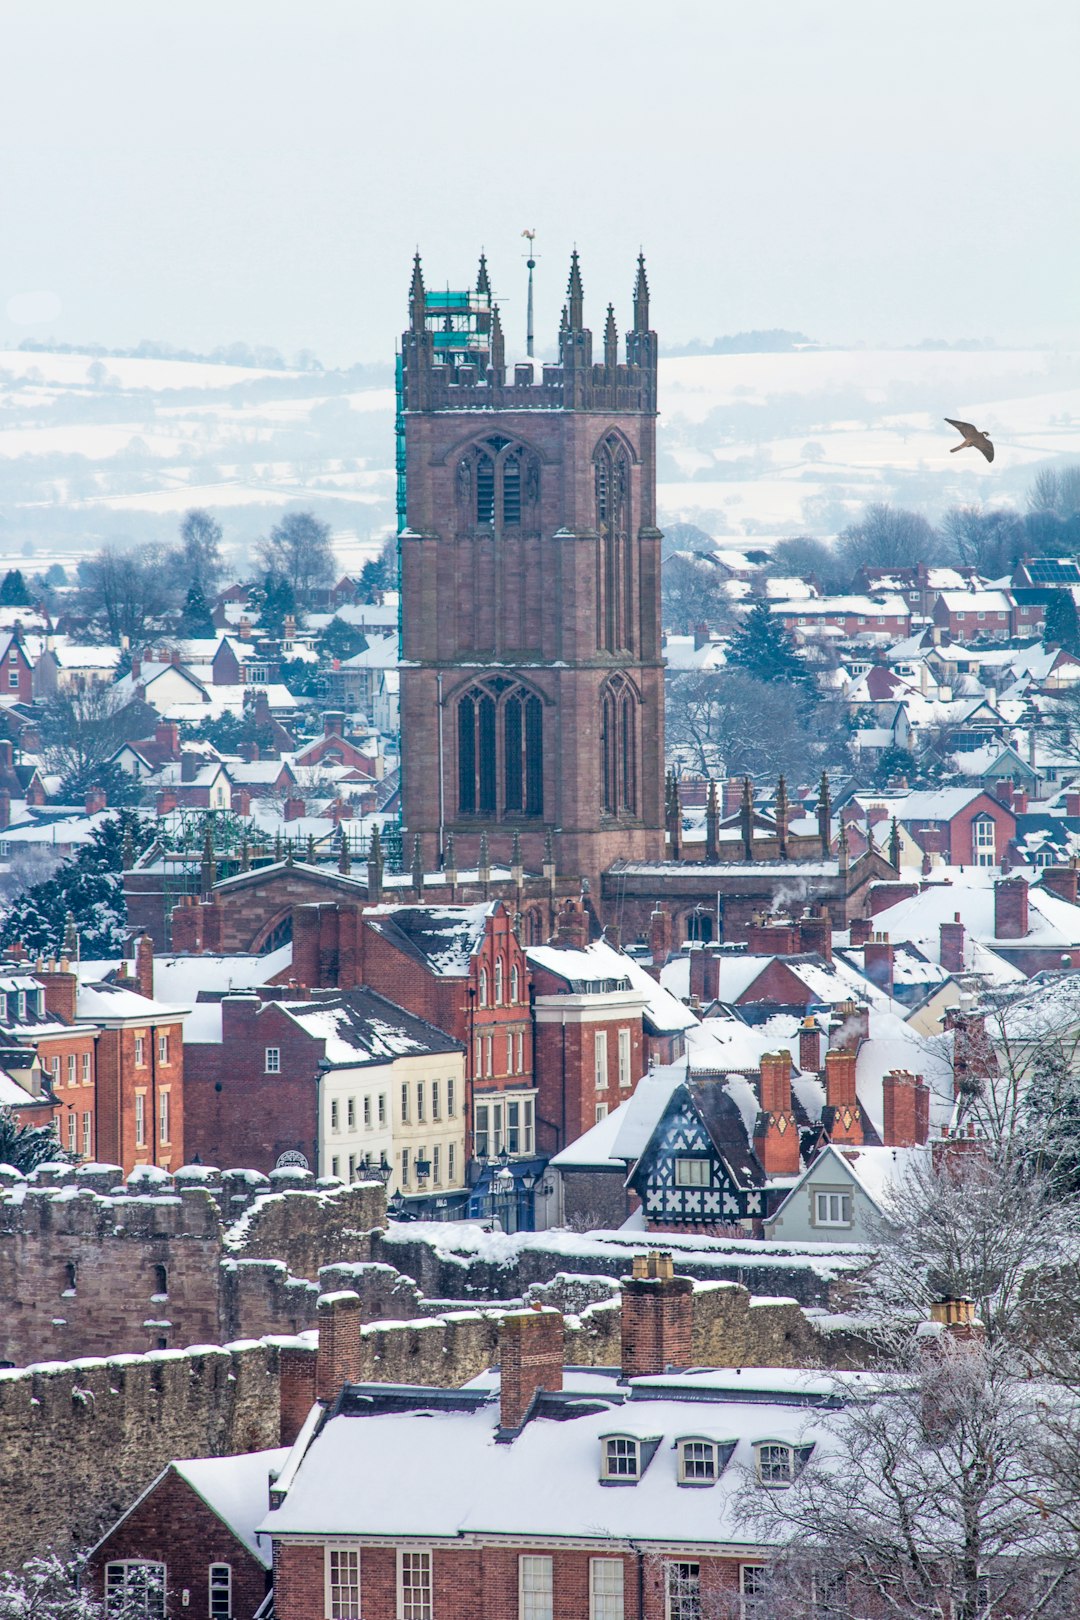 Travel Tips and Stories of Ludlow in United Kingdom